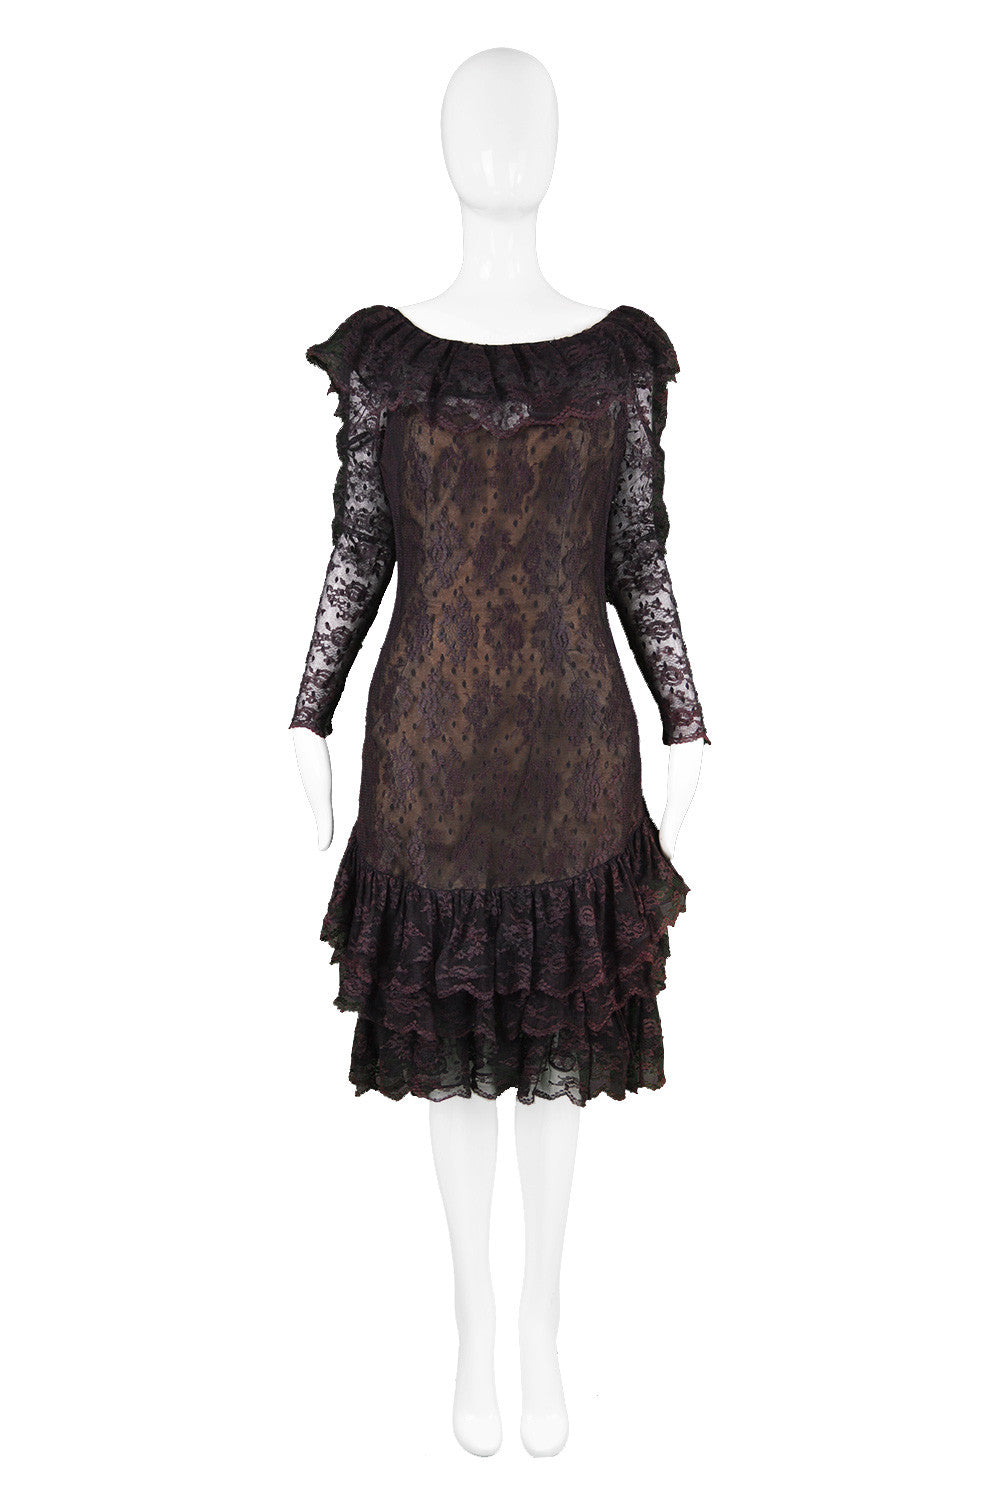 Purple and Black Lace dress by Victor Costa at Harvey Nichols, 1980s